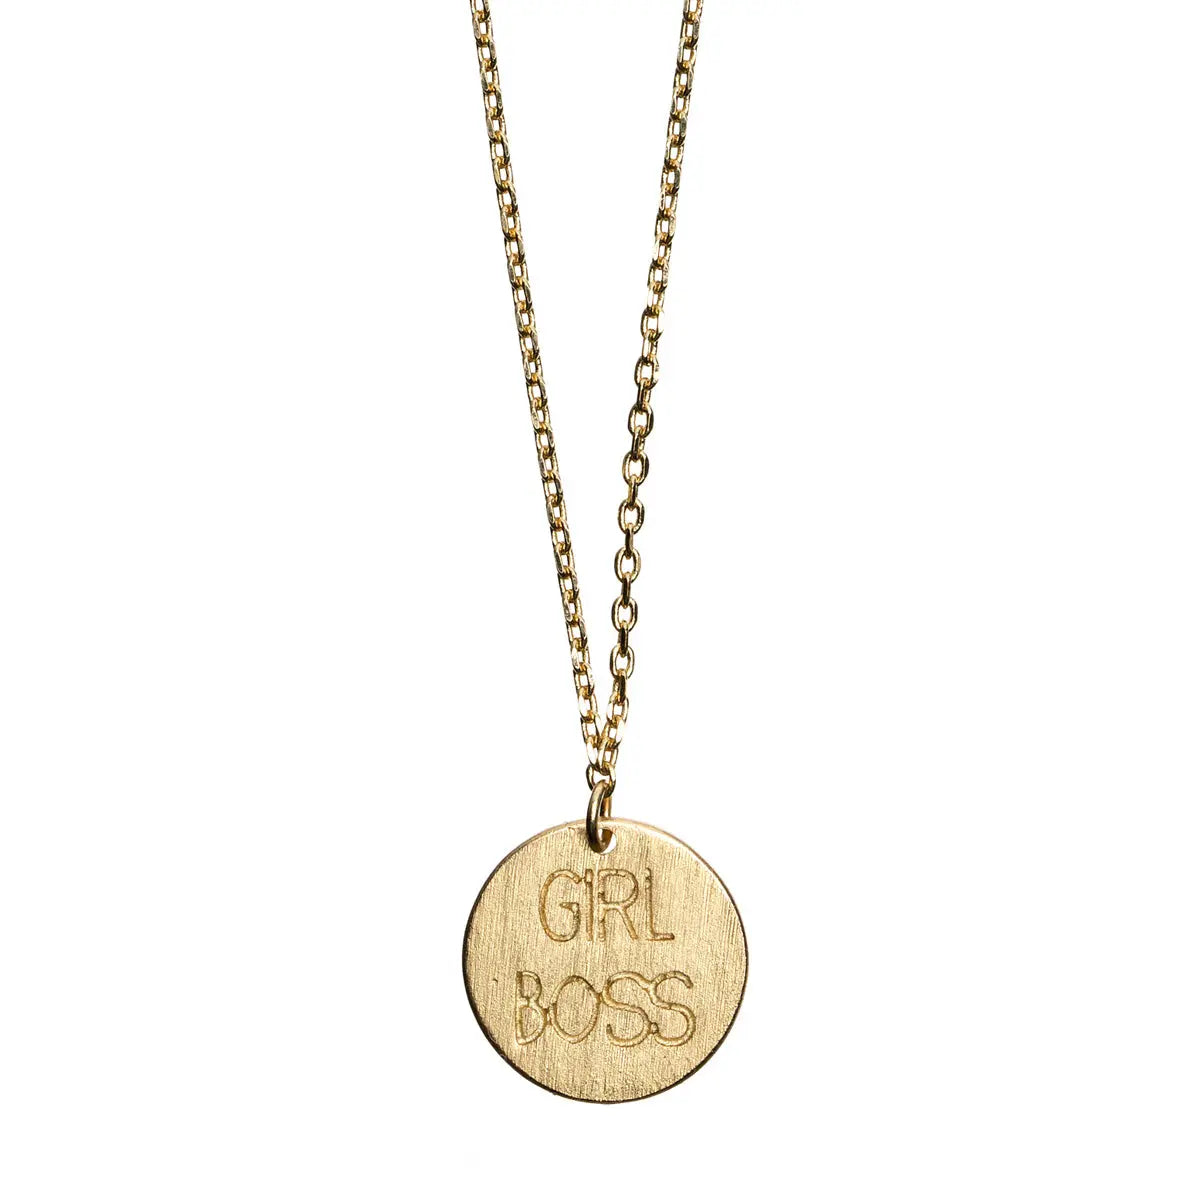 Girl Boss Necklace Gold